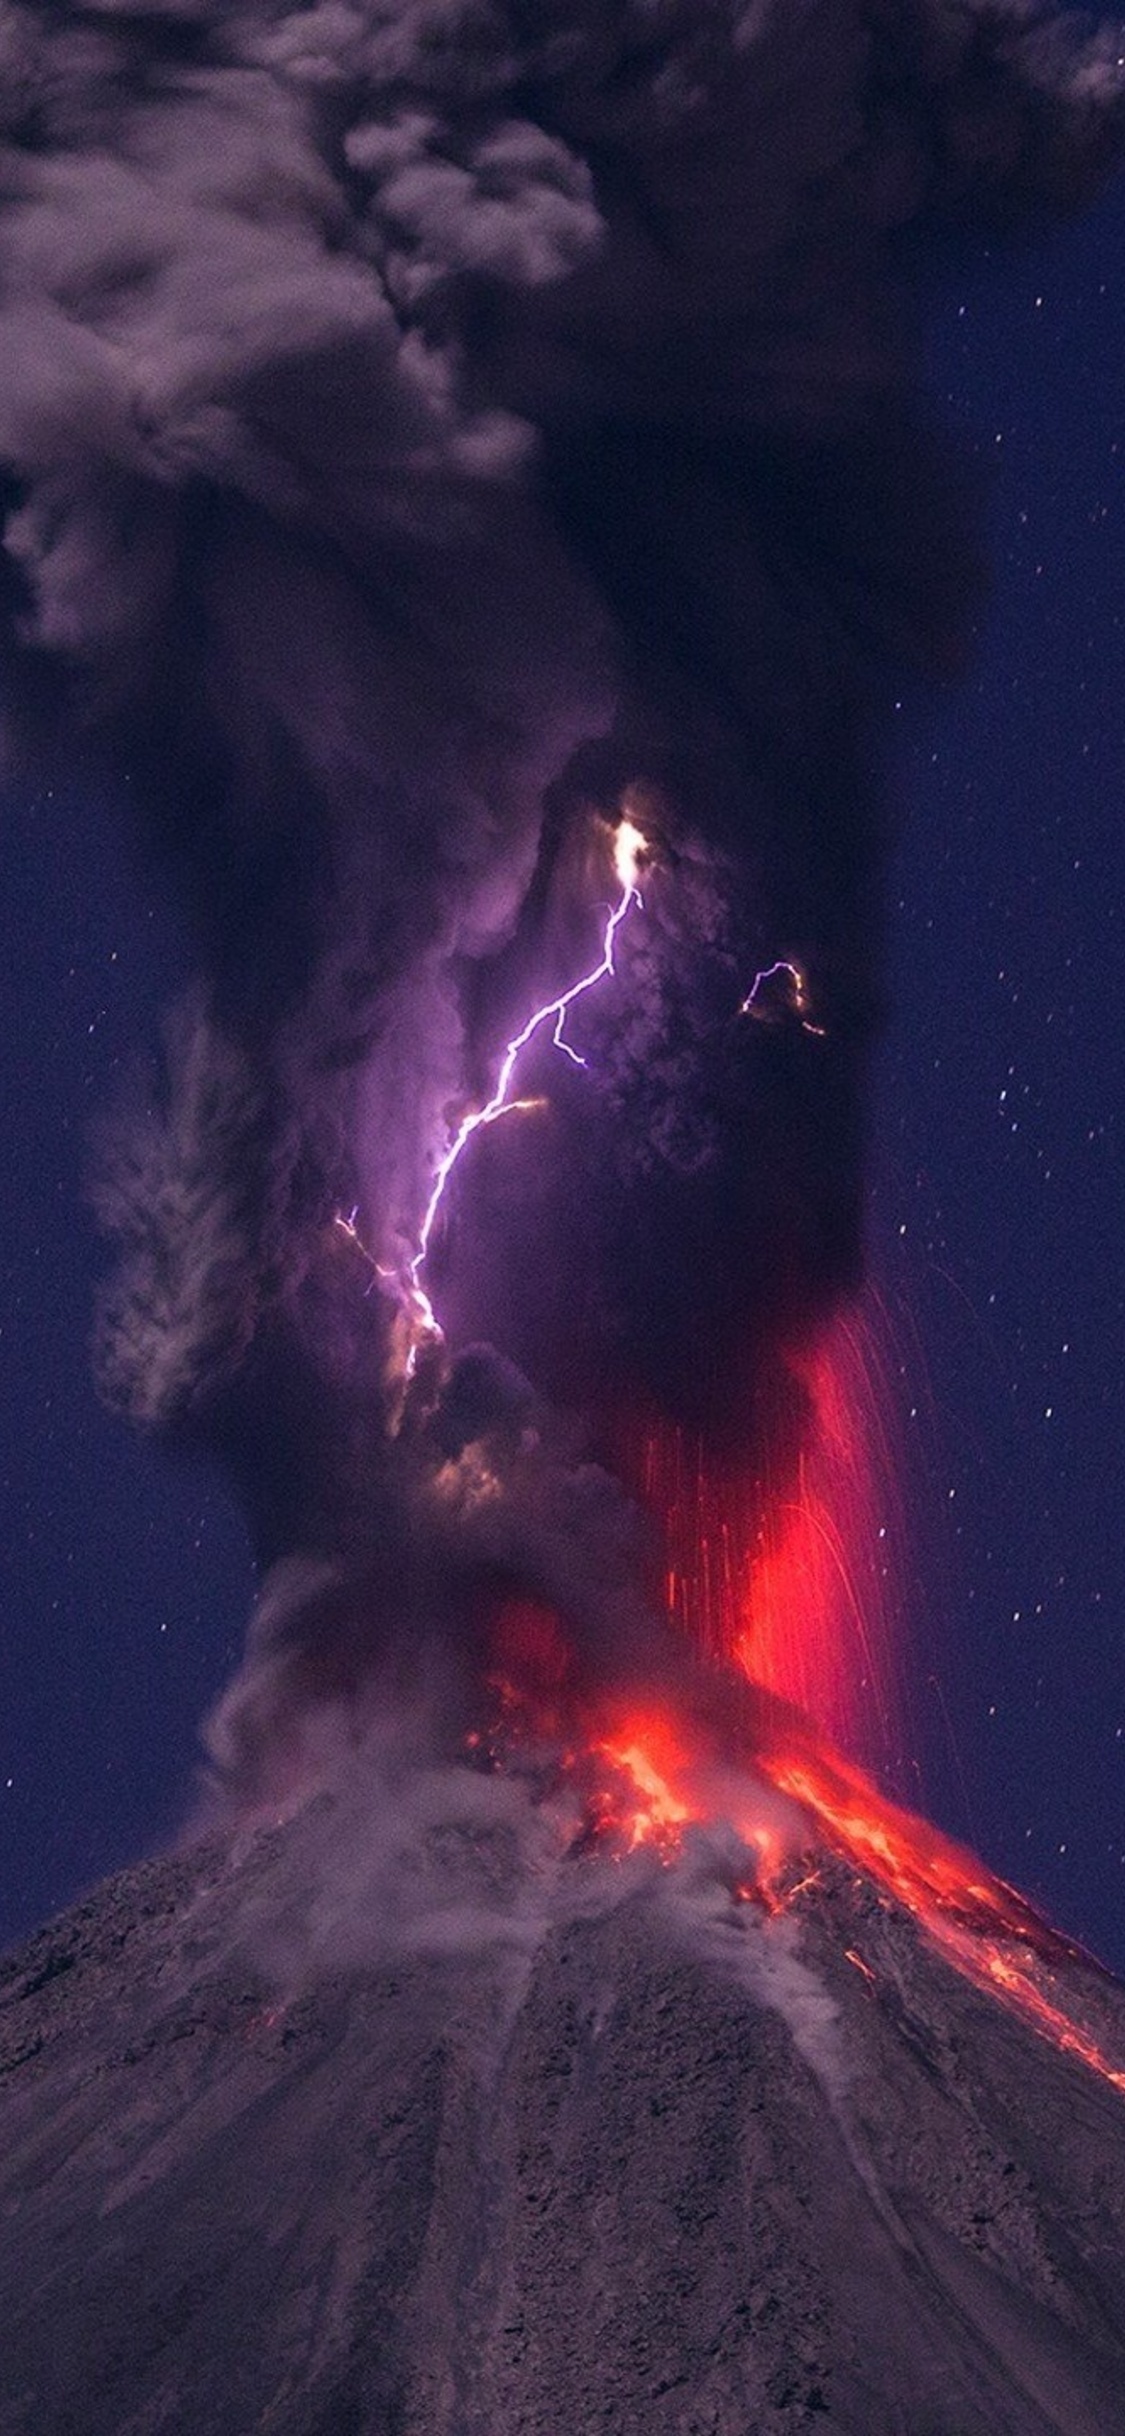 Volcanic eruption, iPhone wallpapers, HD 4k images, Force of nature, 1130x2440 HD Handy